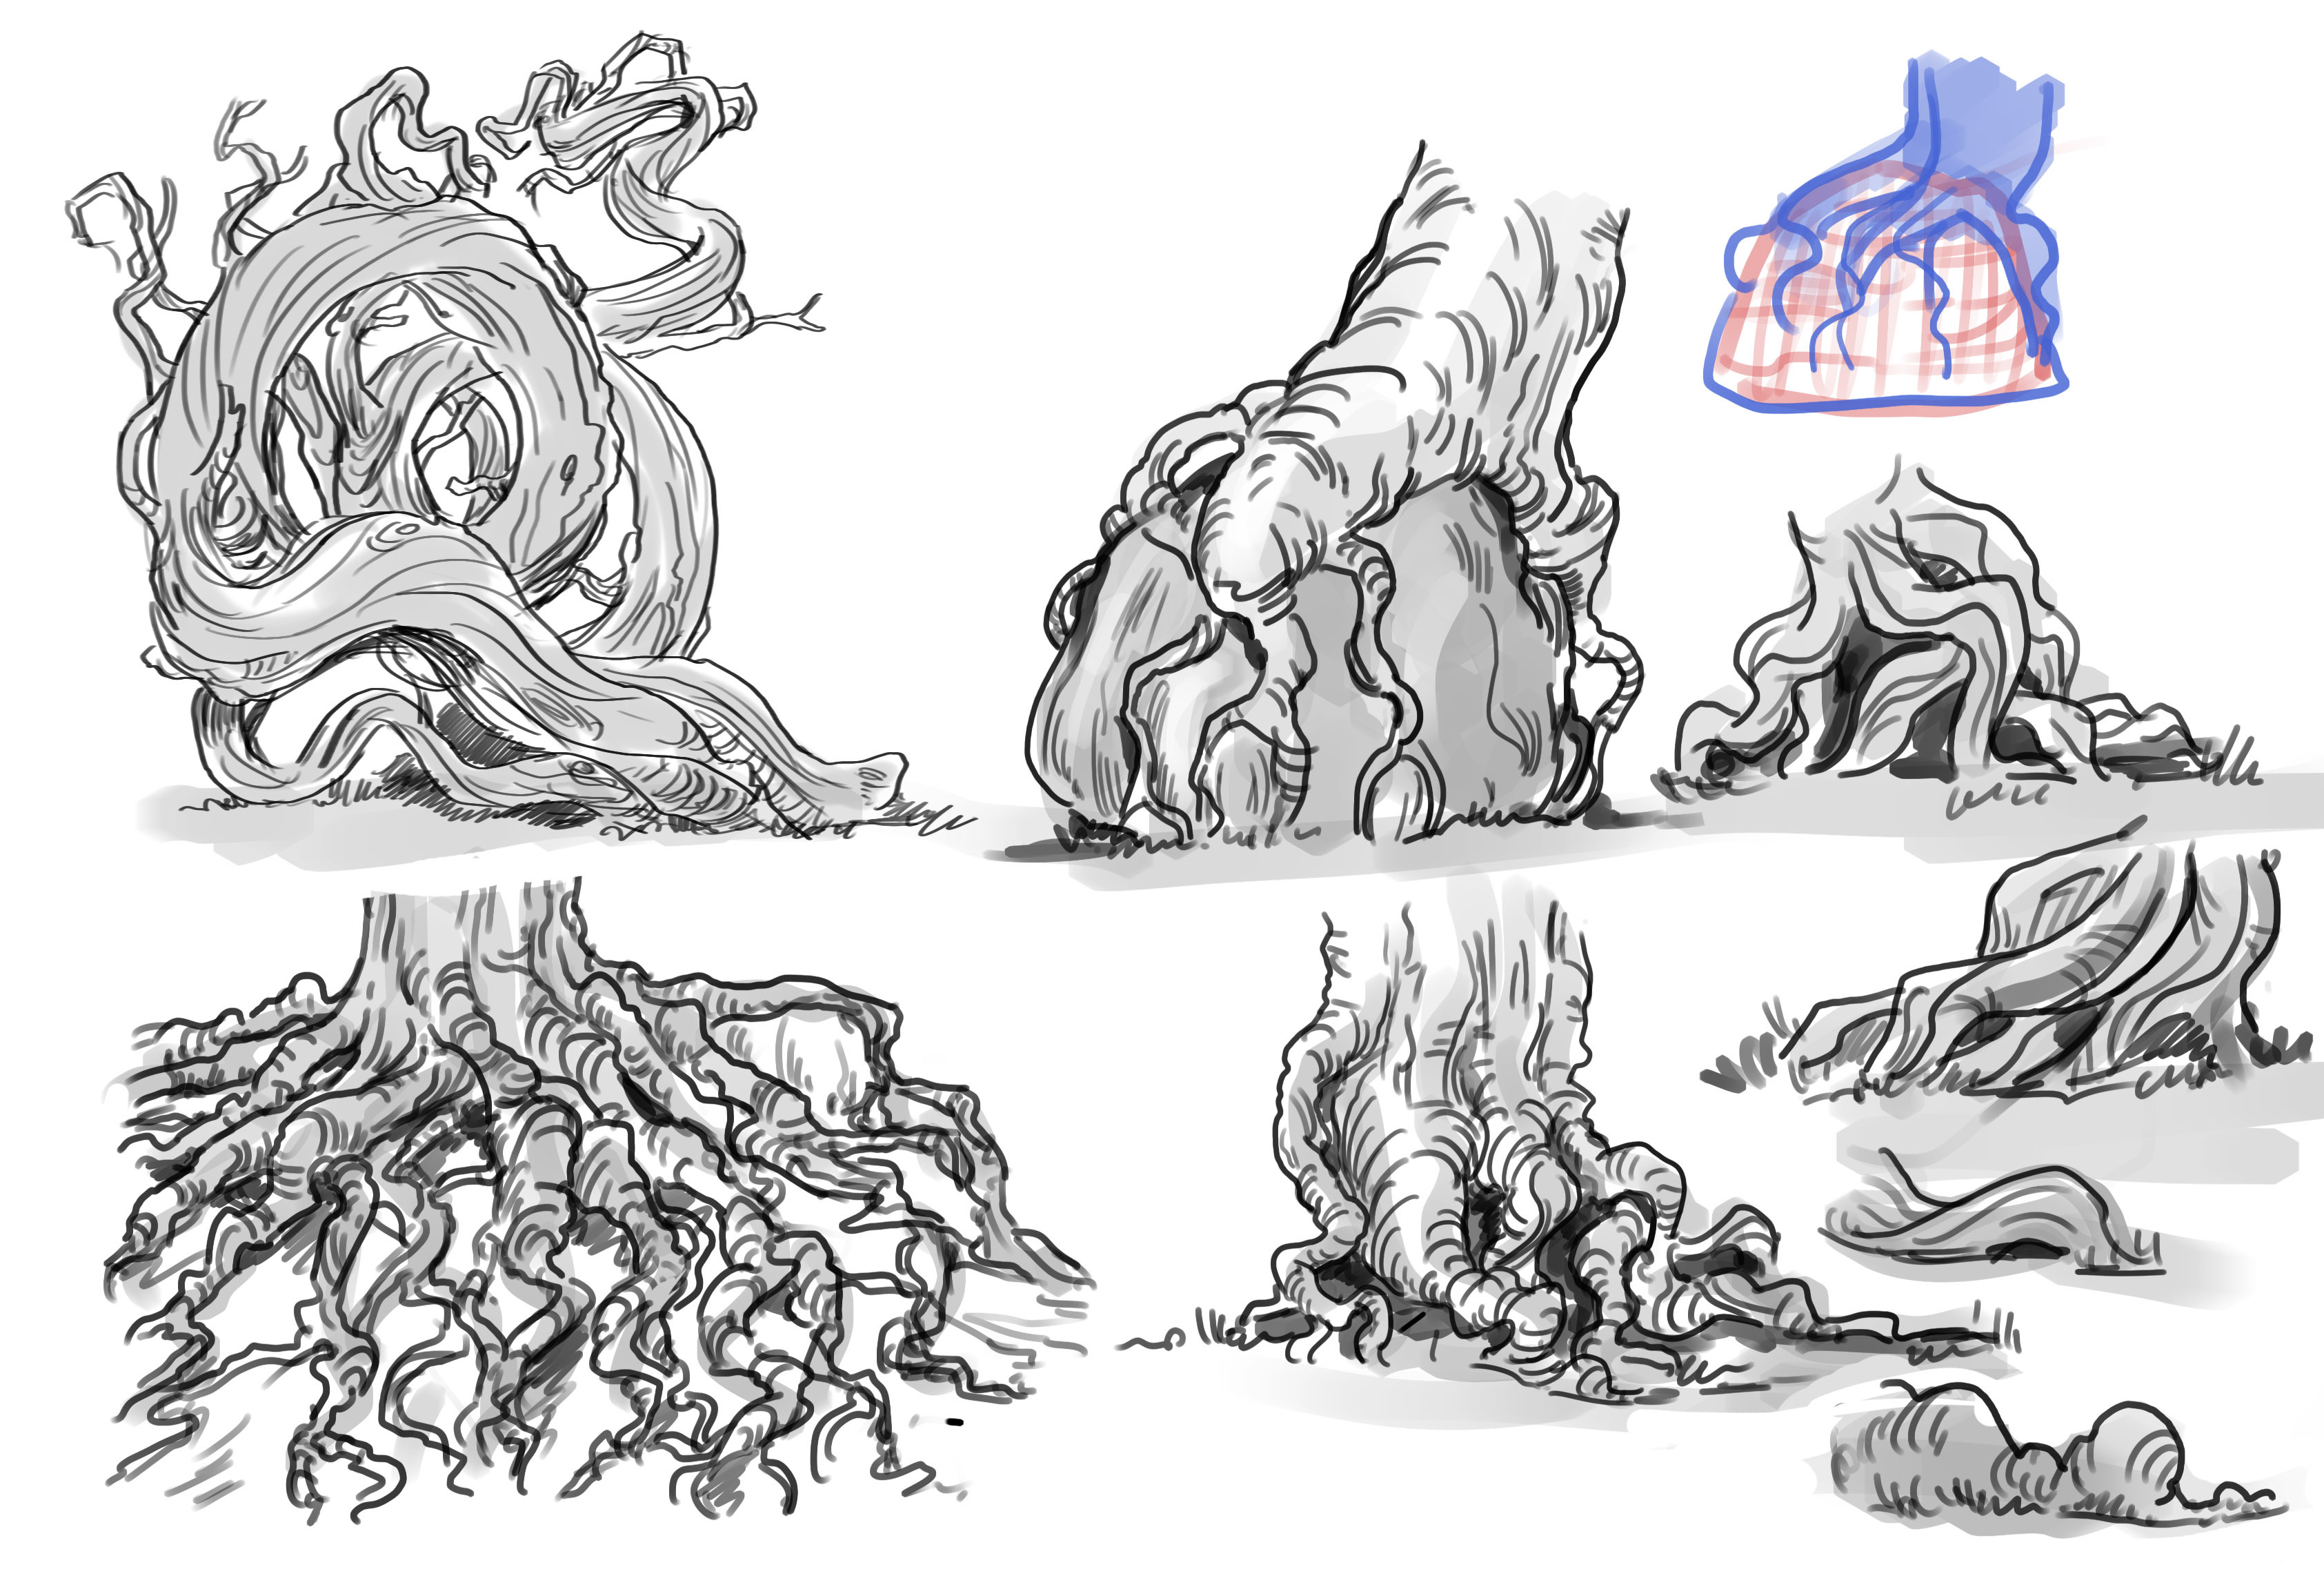 Root studies (with Etherington brothers ref) to get warmed up